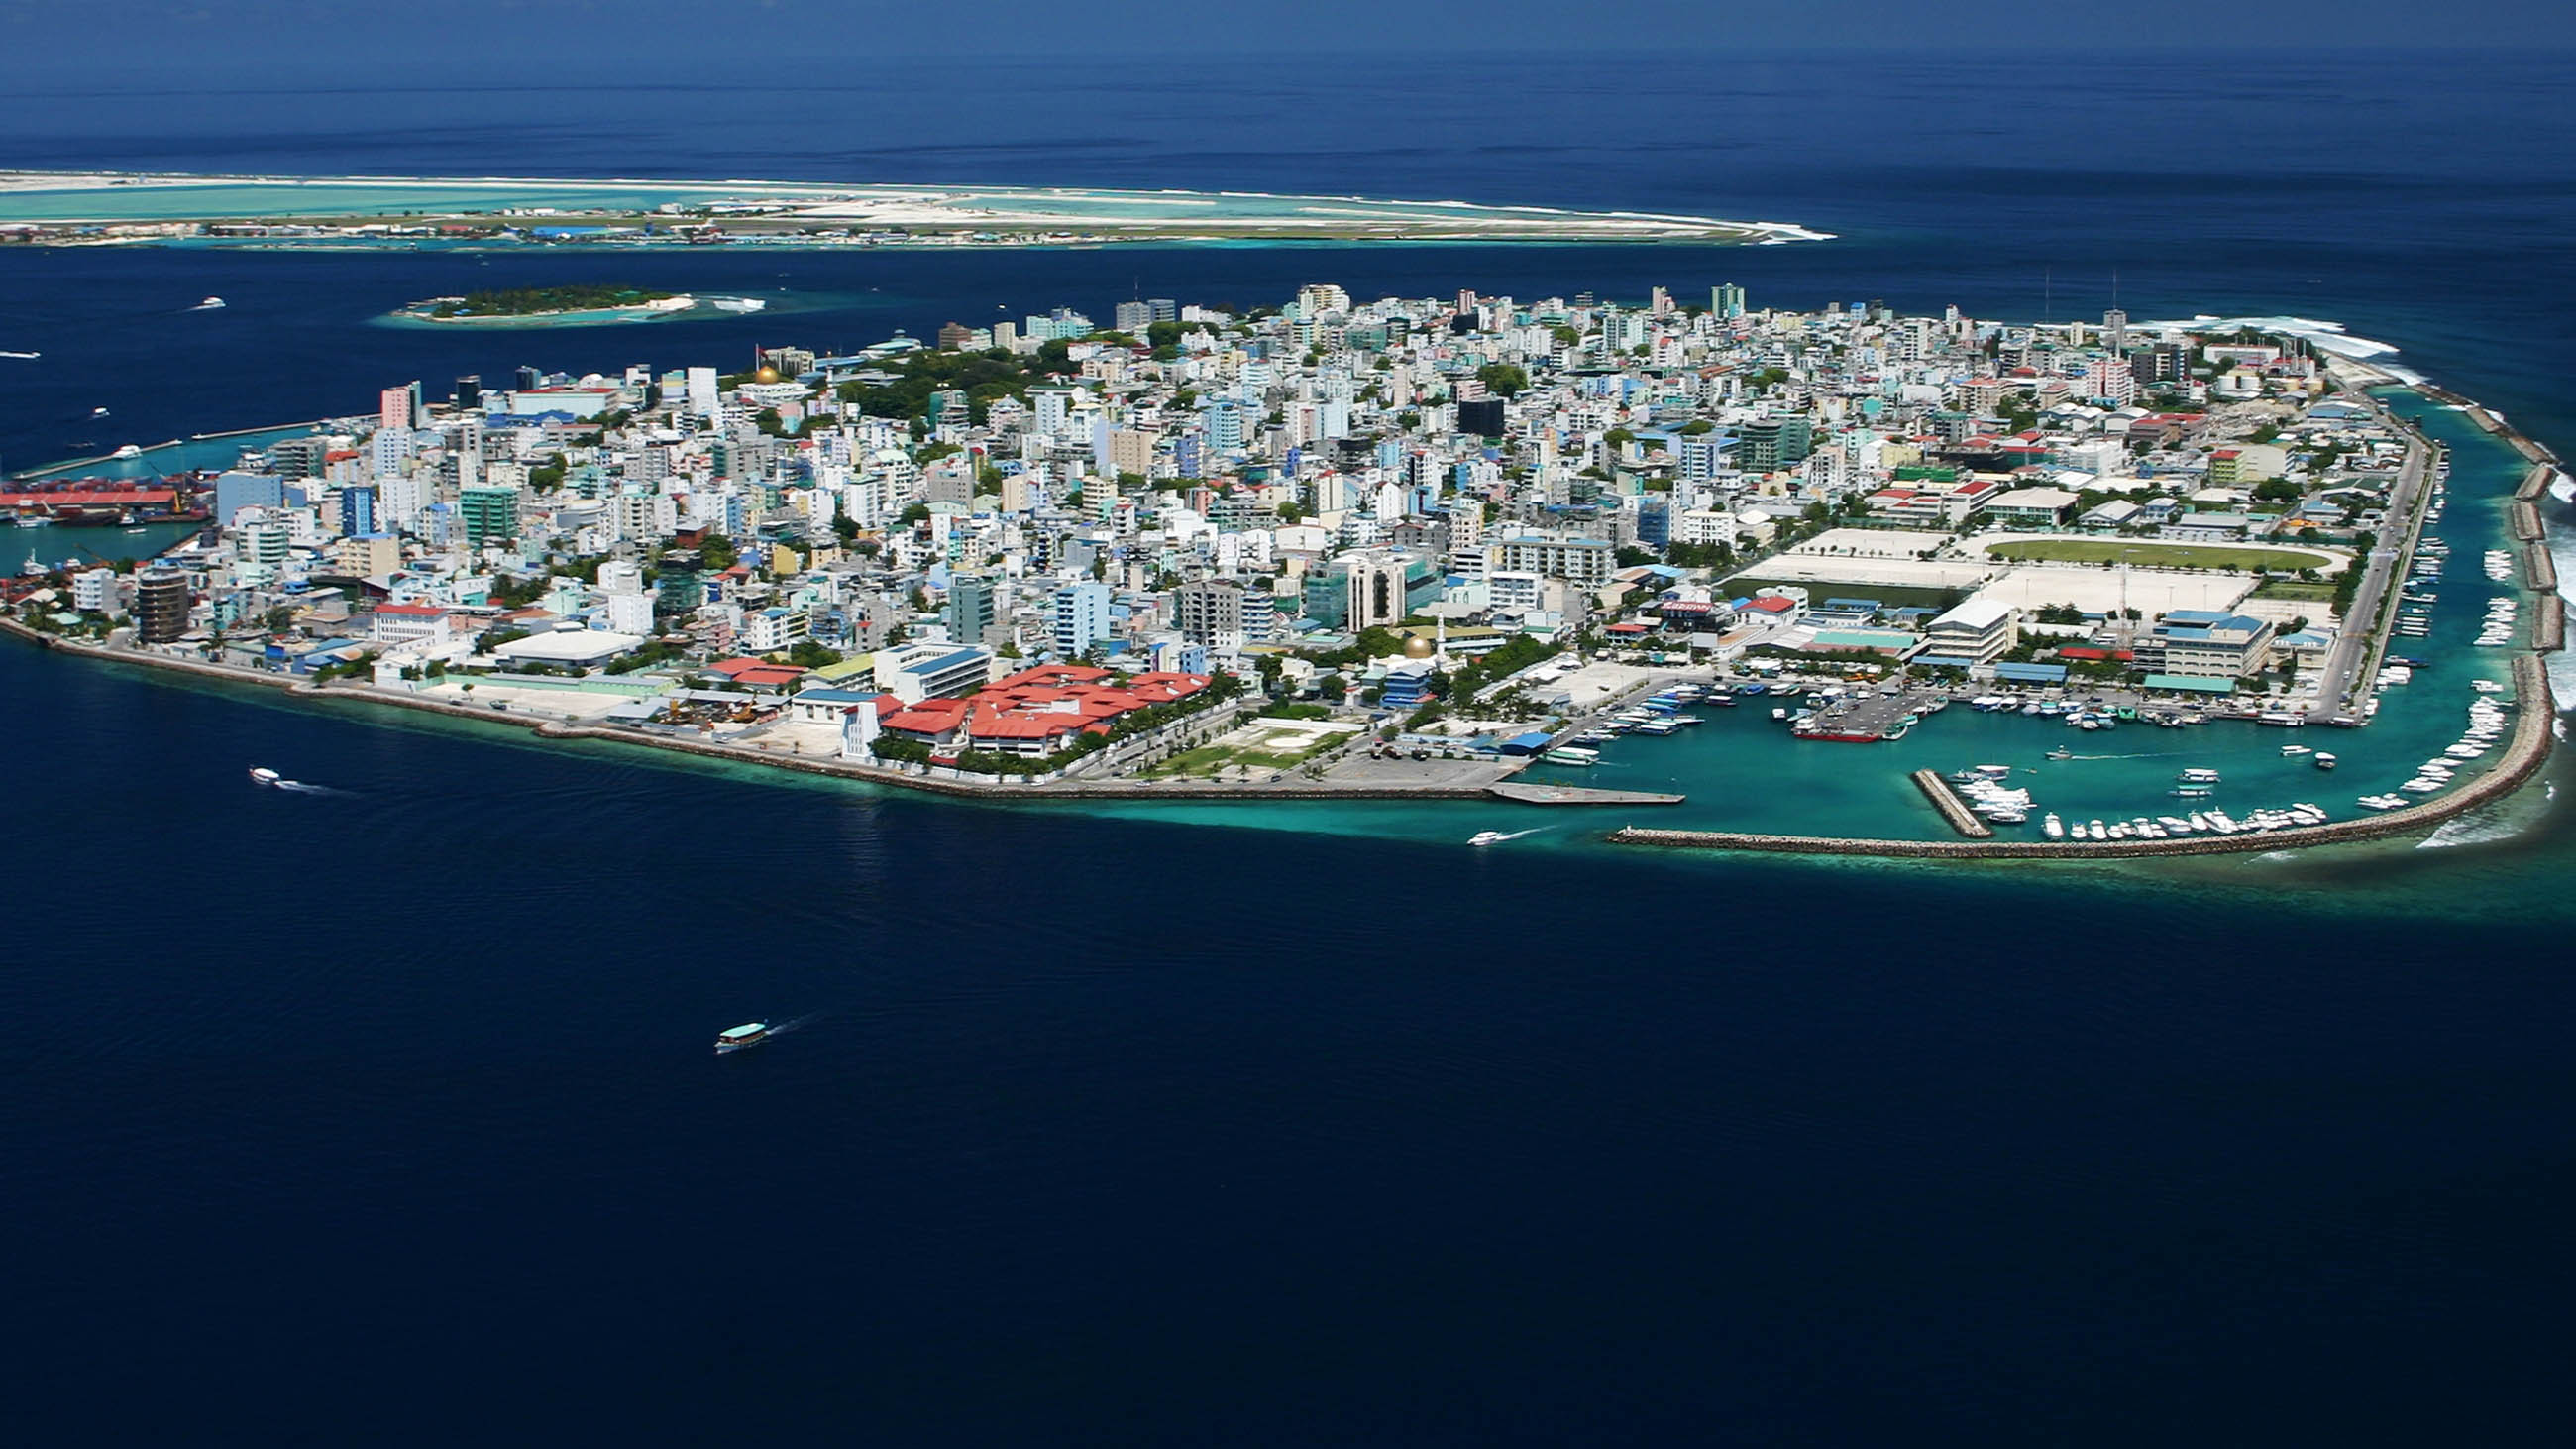 Malé, capital city of the Maldives. Island nations the world over face some tough choices as sea levels rise.